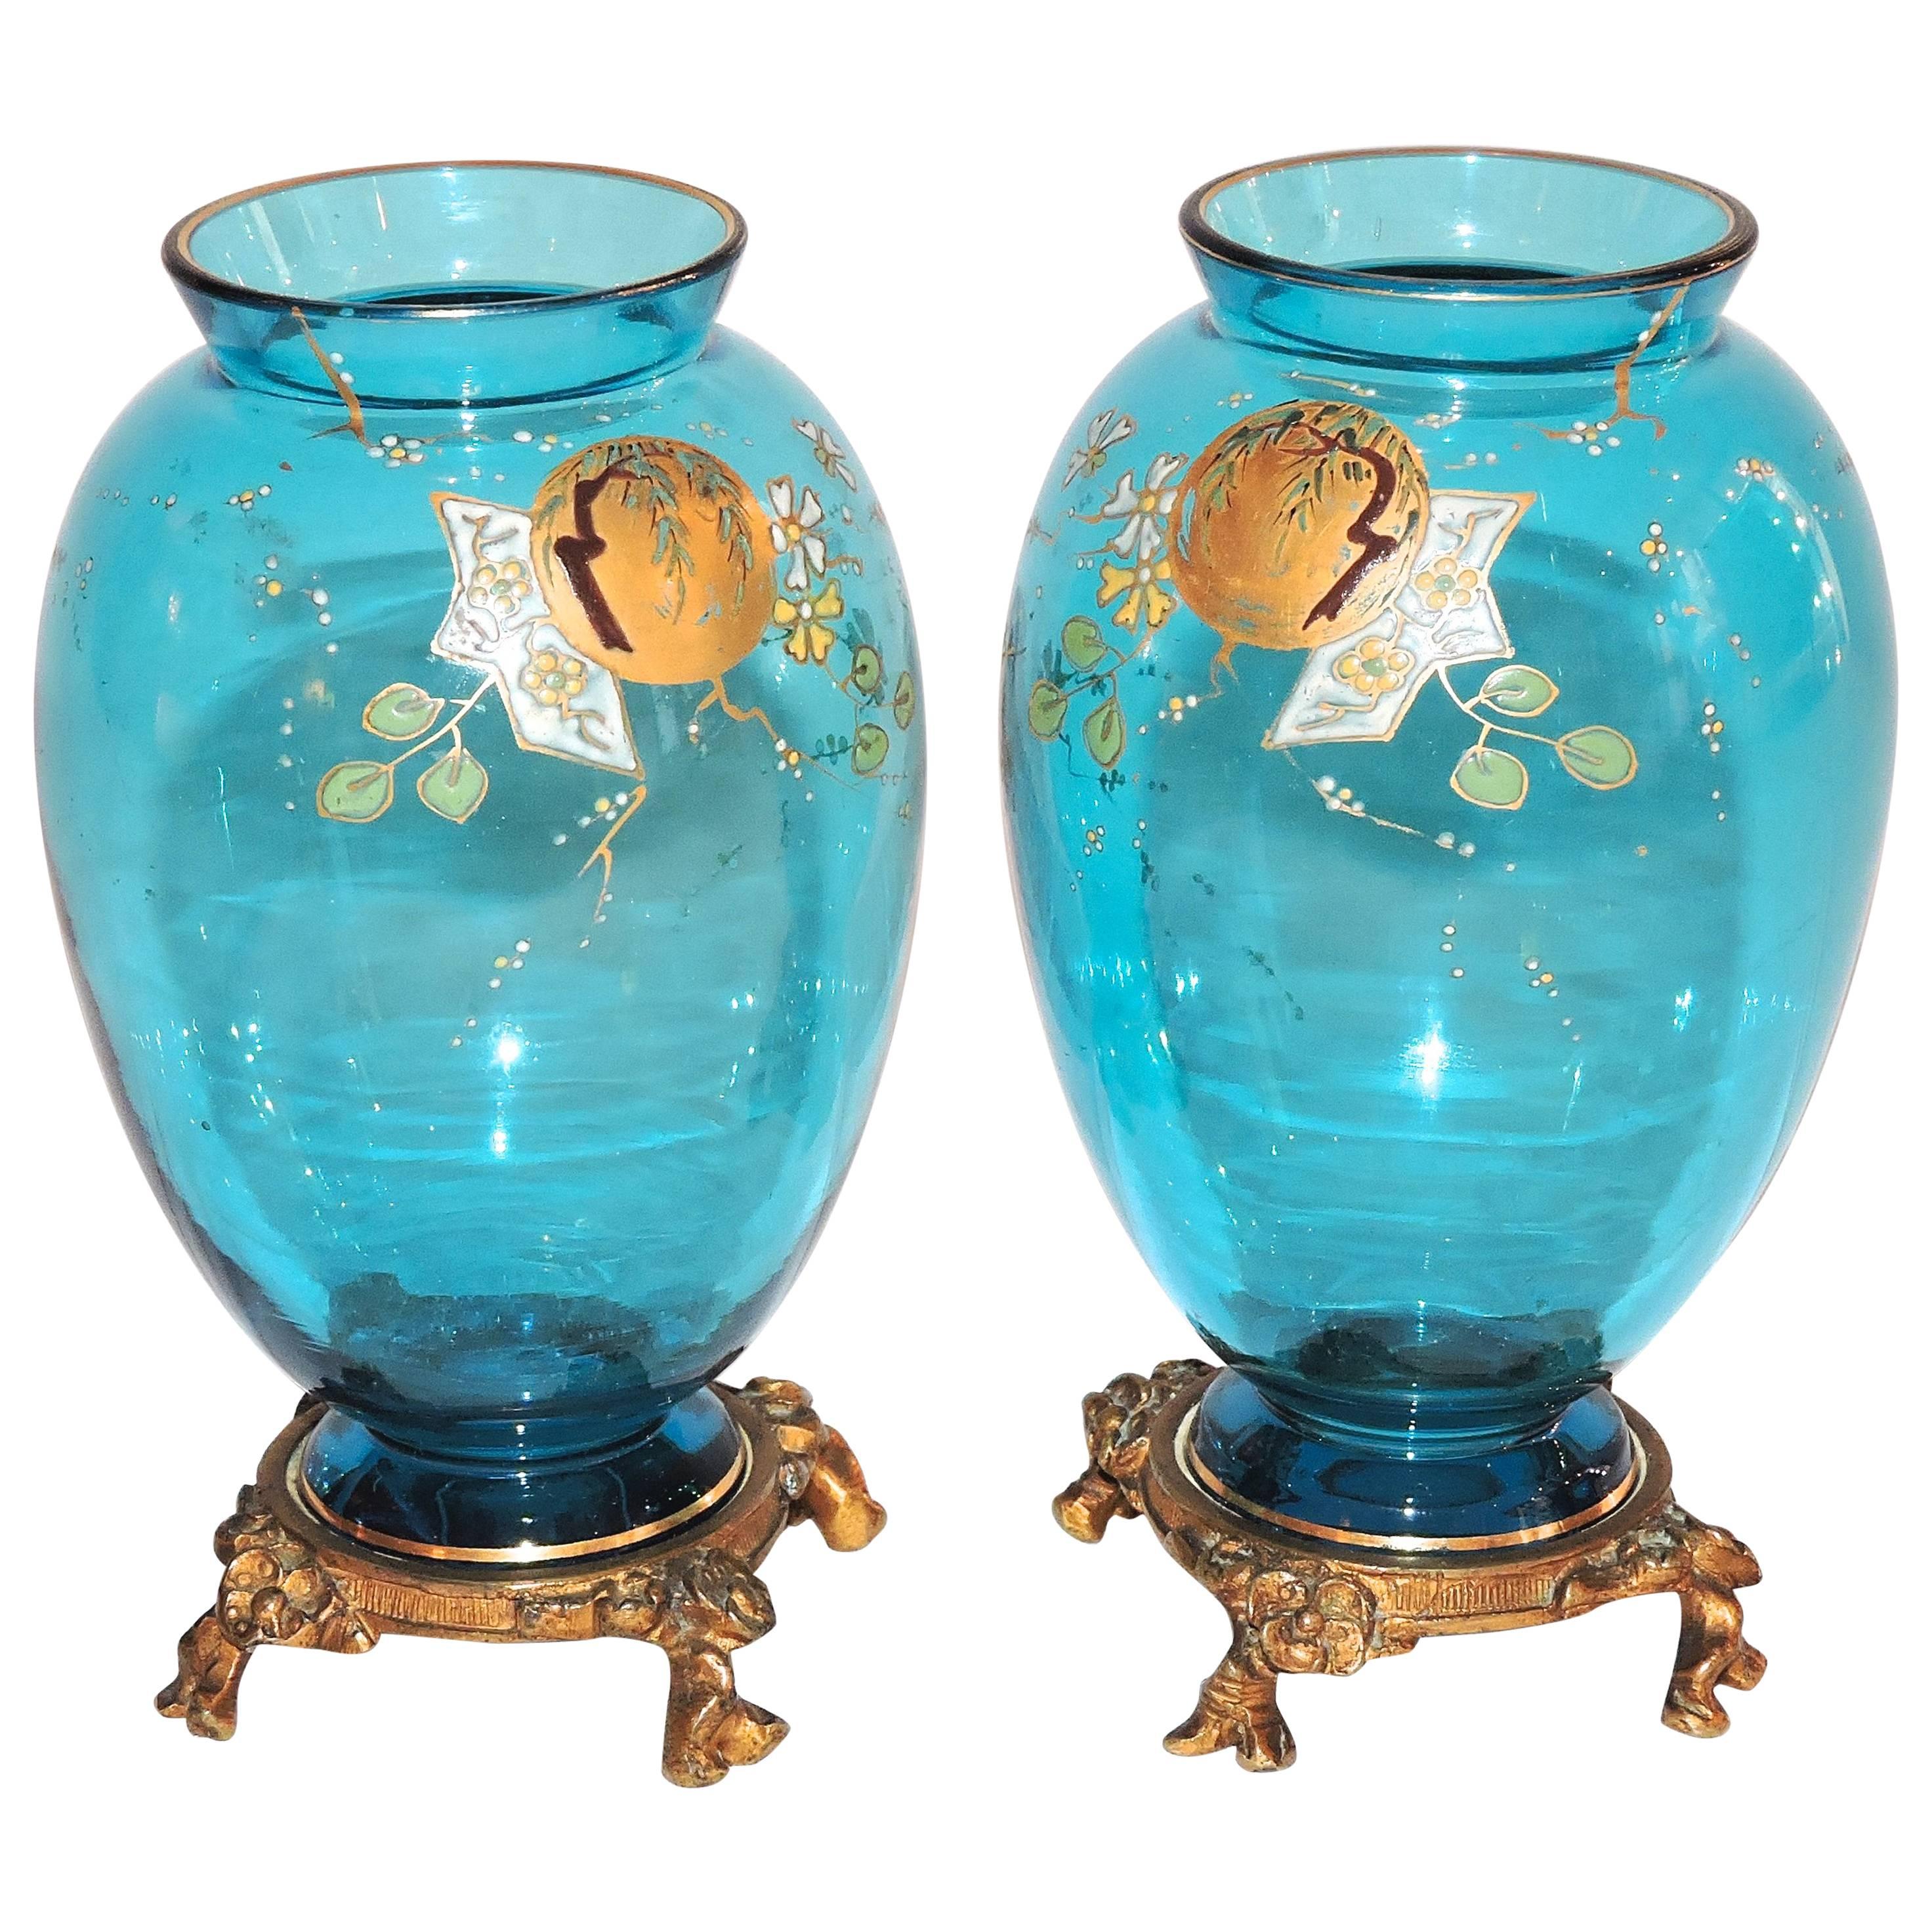 Pair of French Japonisme Blue Crystal Enamel Vases Attributed to Baccarat